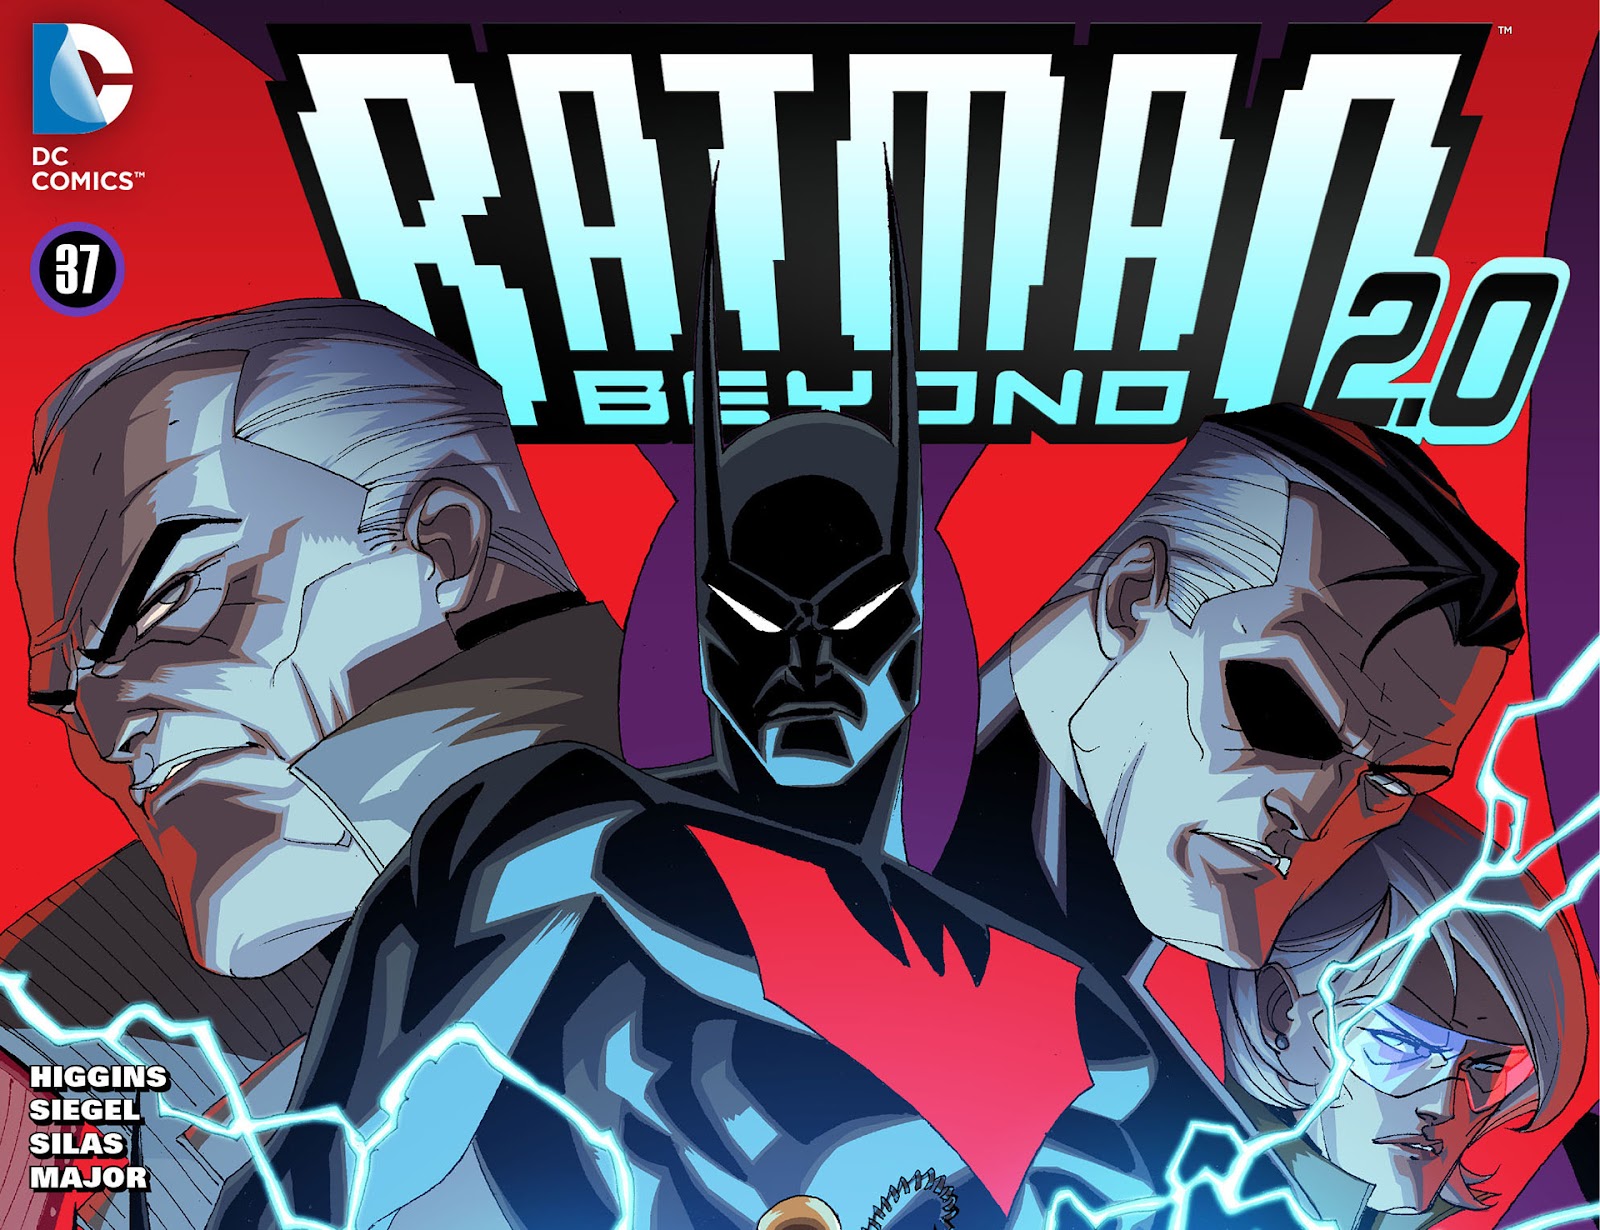 Batman Beyond 2.0 issue 37 - Page 1